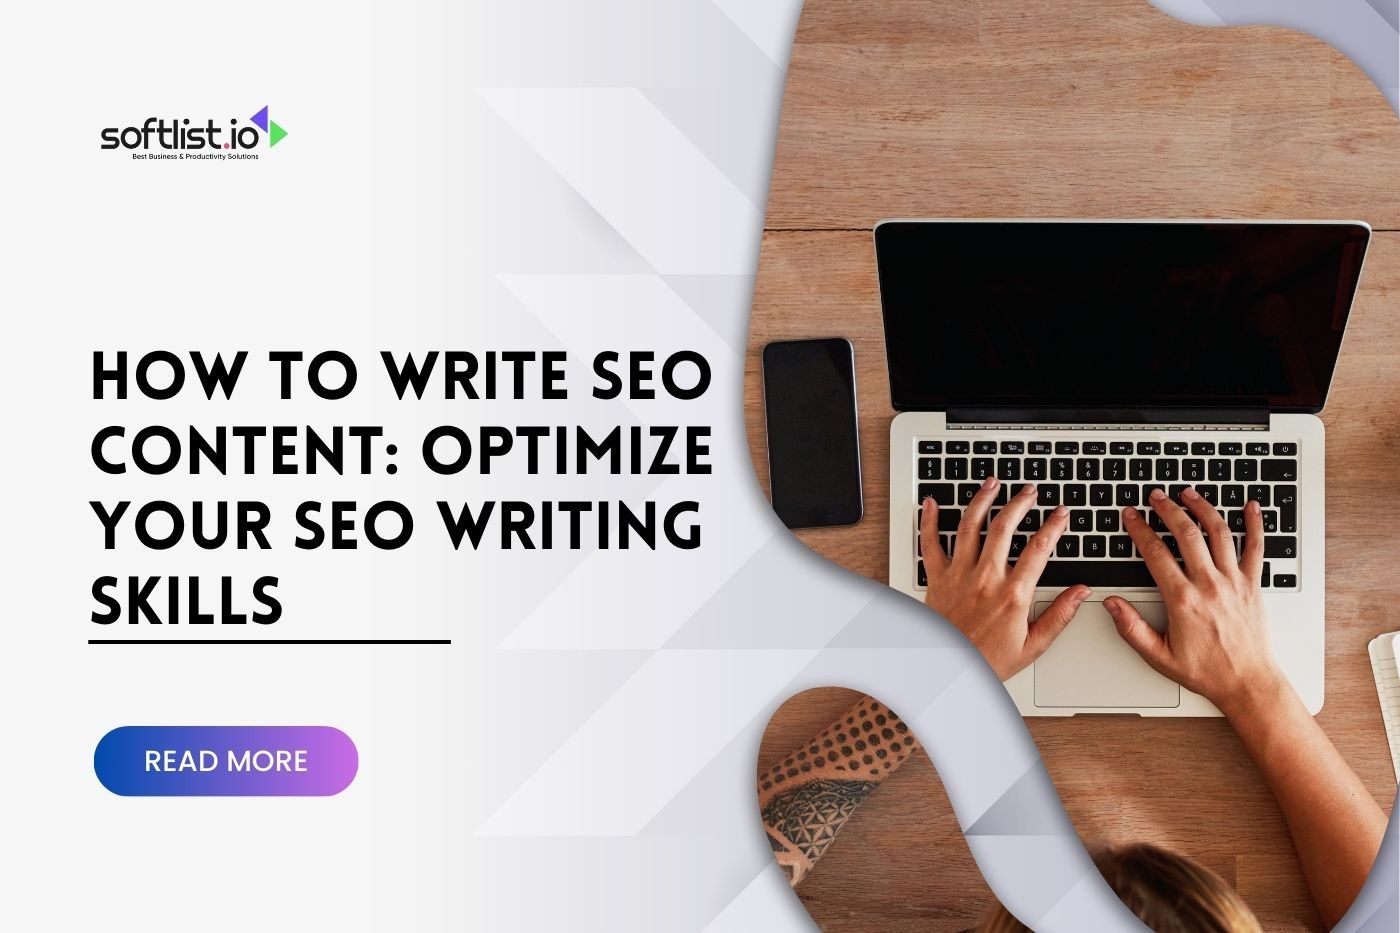 How to Write SEO Content Optimize Your SEO Writing Skills